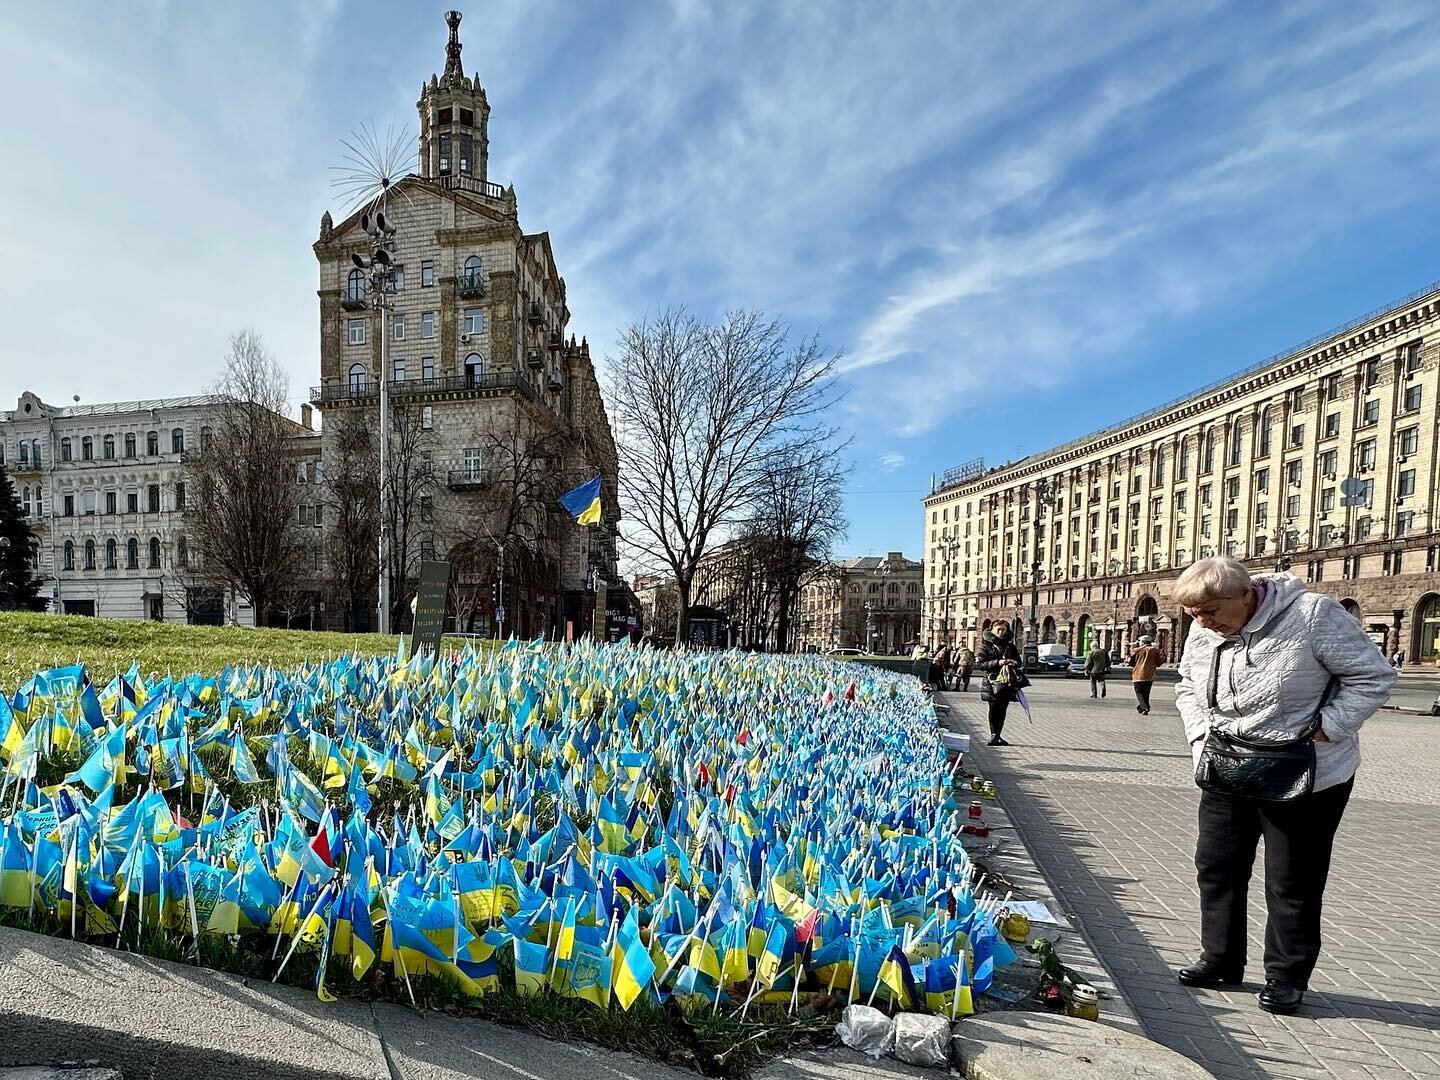 A memorial in Independence Square counts the number of Ukrainians and foreigners killed by Putin. 

The most recent UN tally reports 8,300 Ukrainian civilians killed since February 2022.